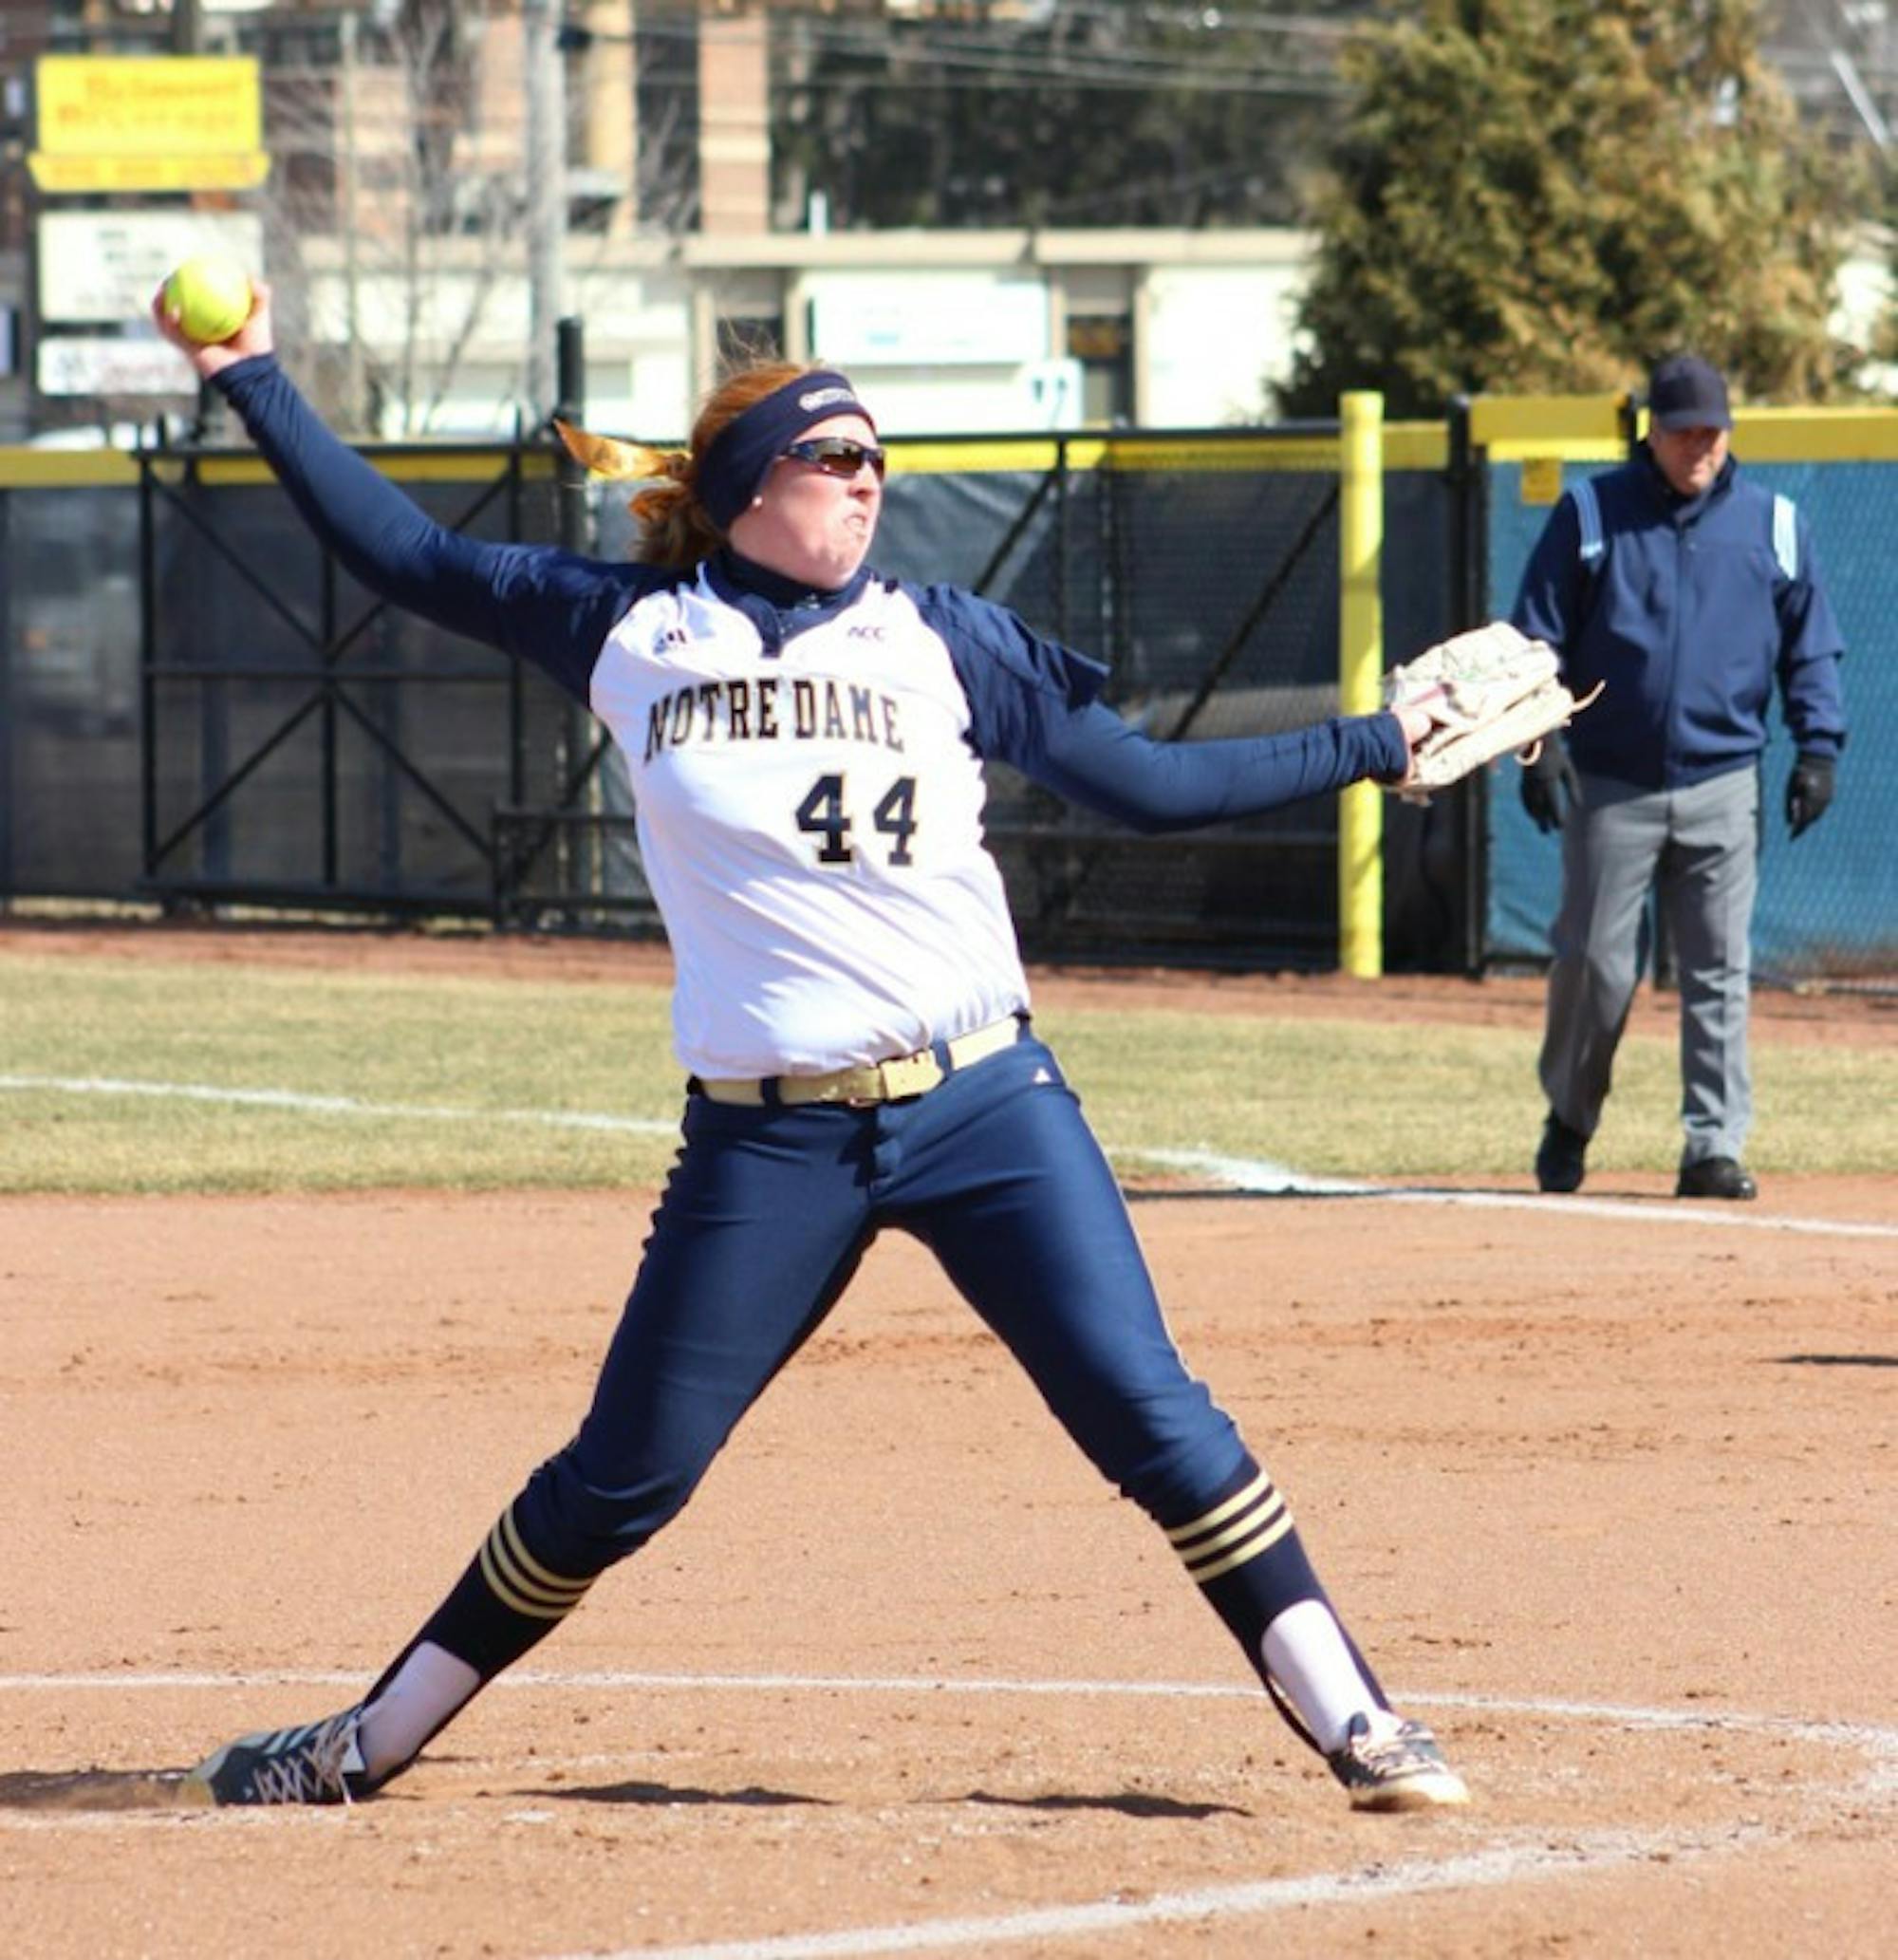 Irish senior pitcher Laura Winter winds up for a pitch during Notre Dame’s 11-4 victory over Ball State on Tuesday. Winter earned her 97th win, breaking the previous program record.